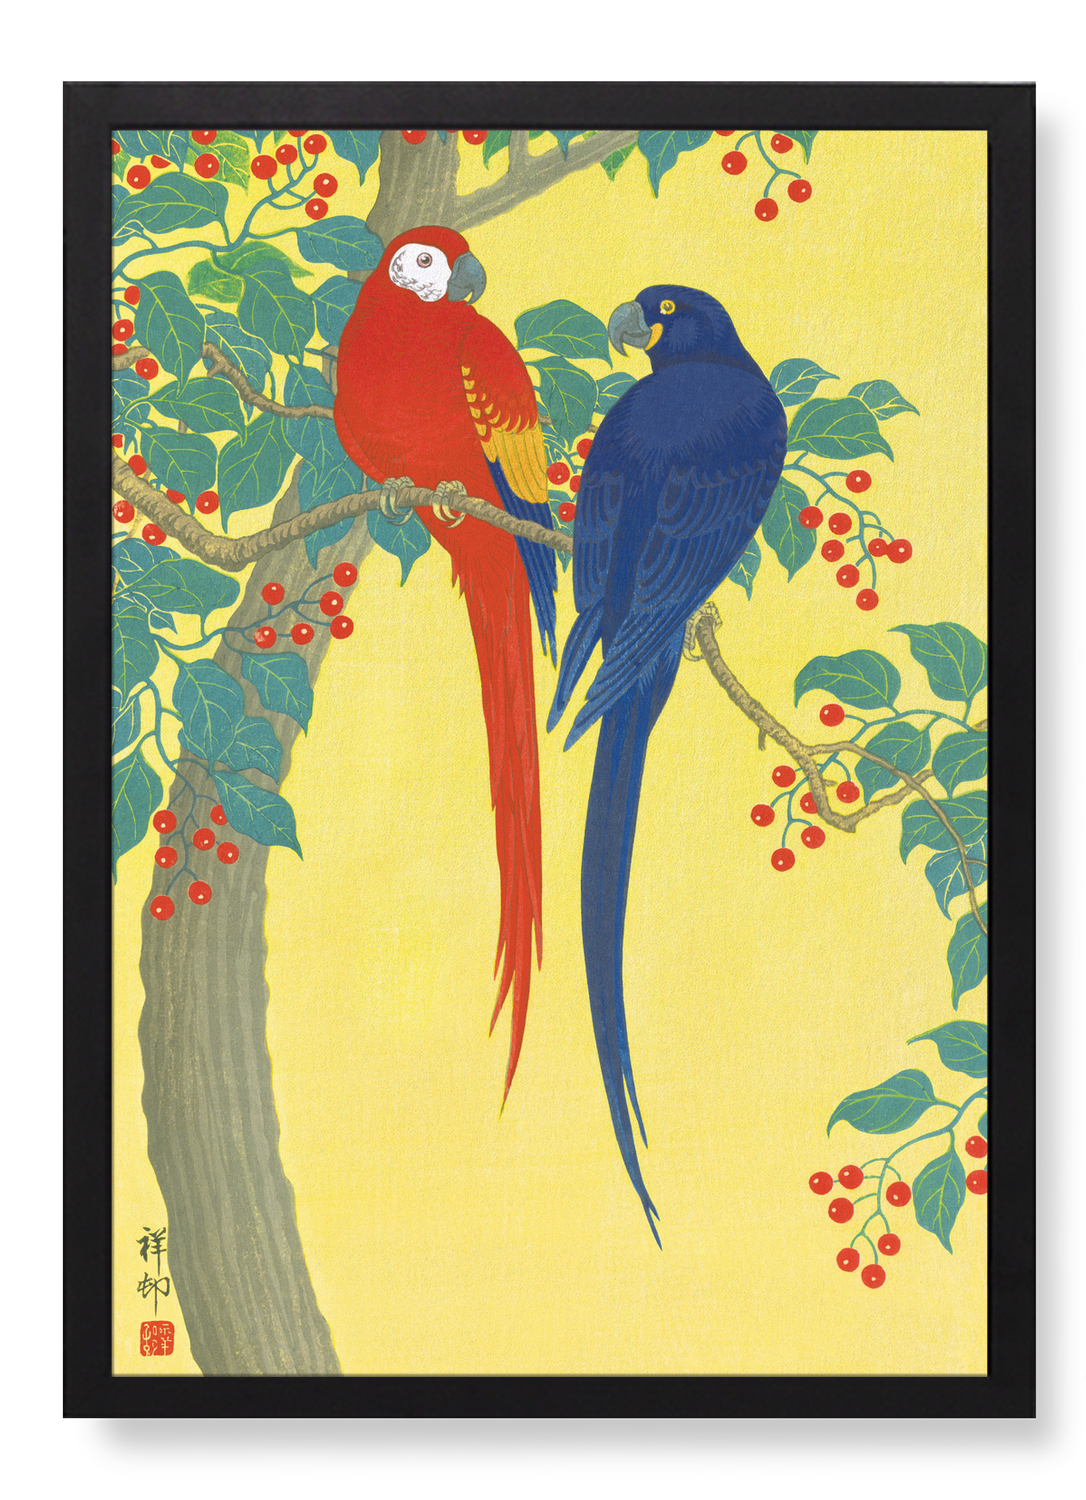 TWO PARROTS AND BERRIES (C.1910)